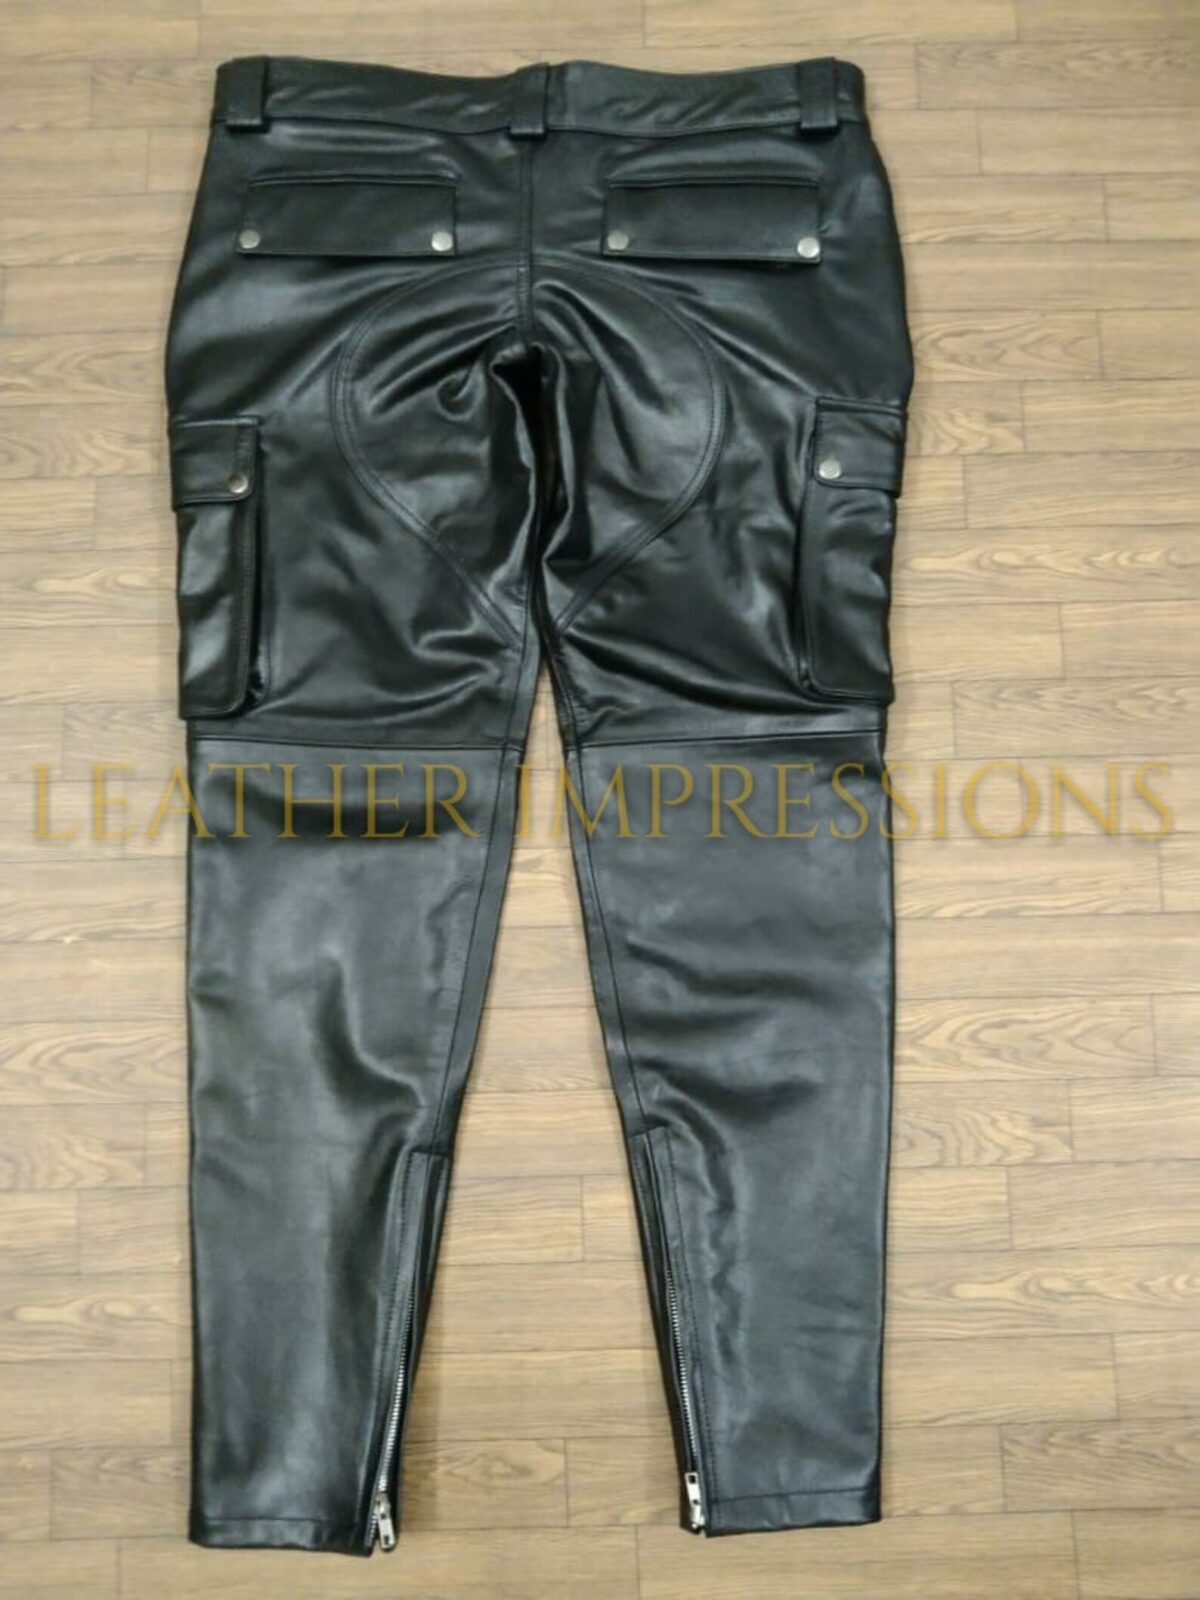 BDSM Black Leather Cargo Pants, brown leather pants, leather pants black, black leather pants mens, straight leg leather pants